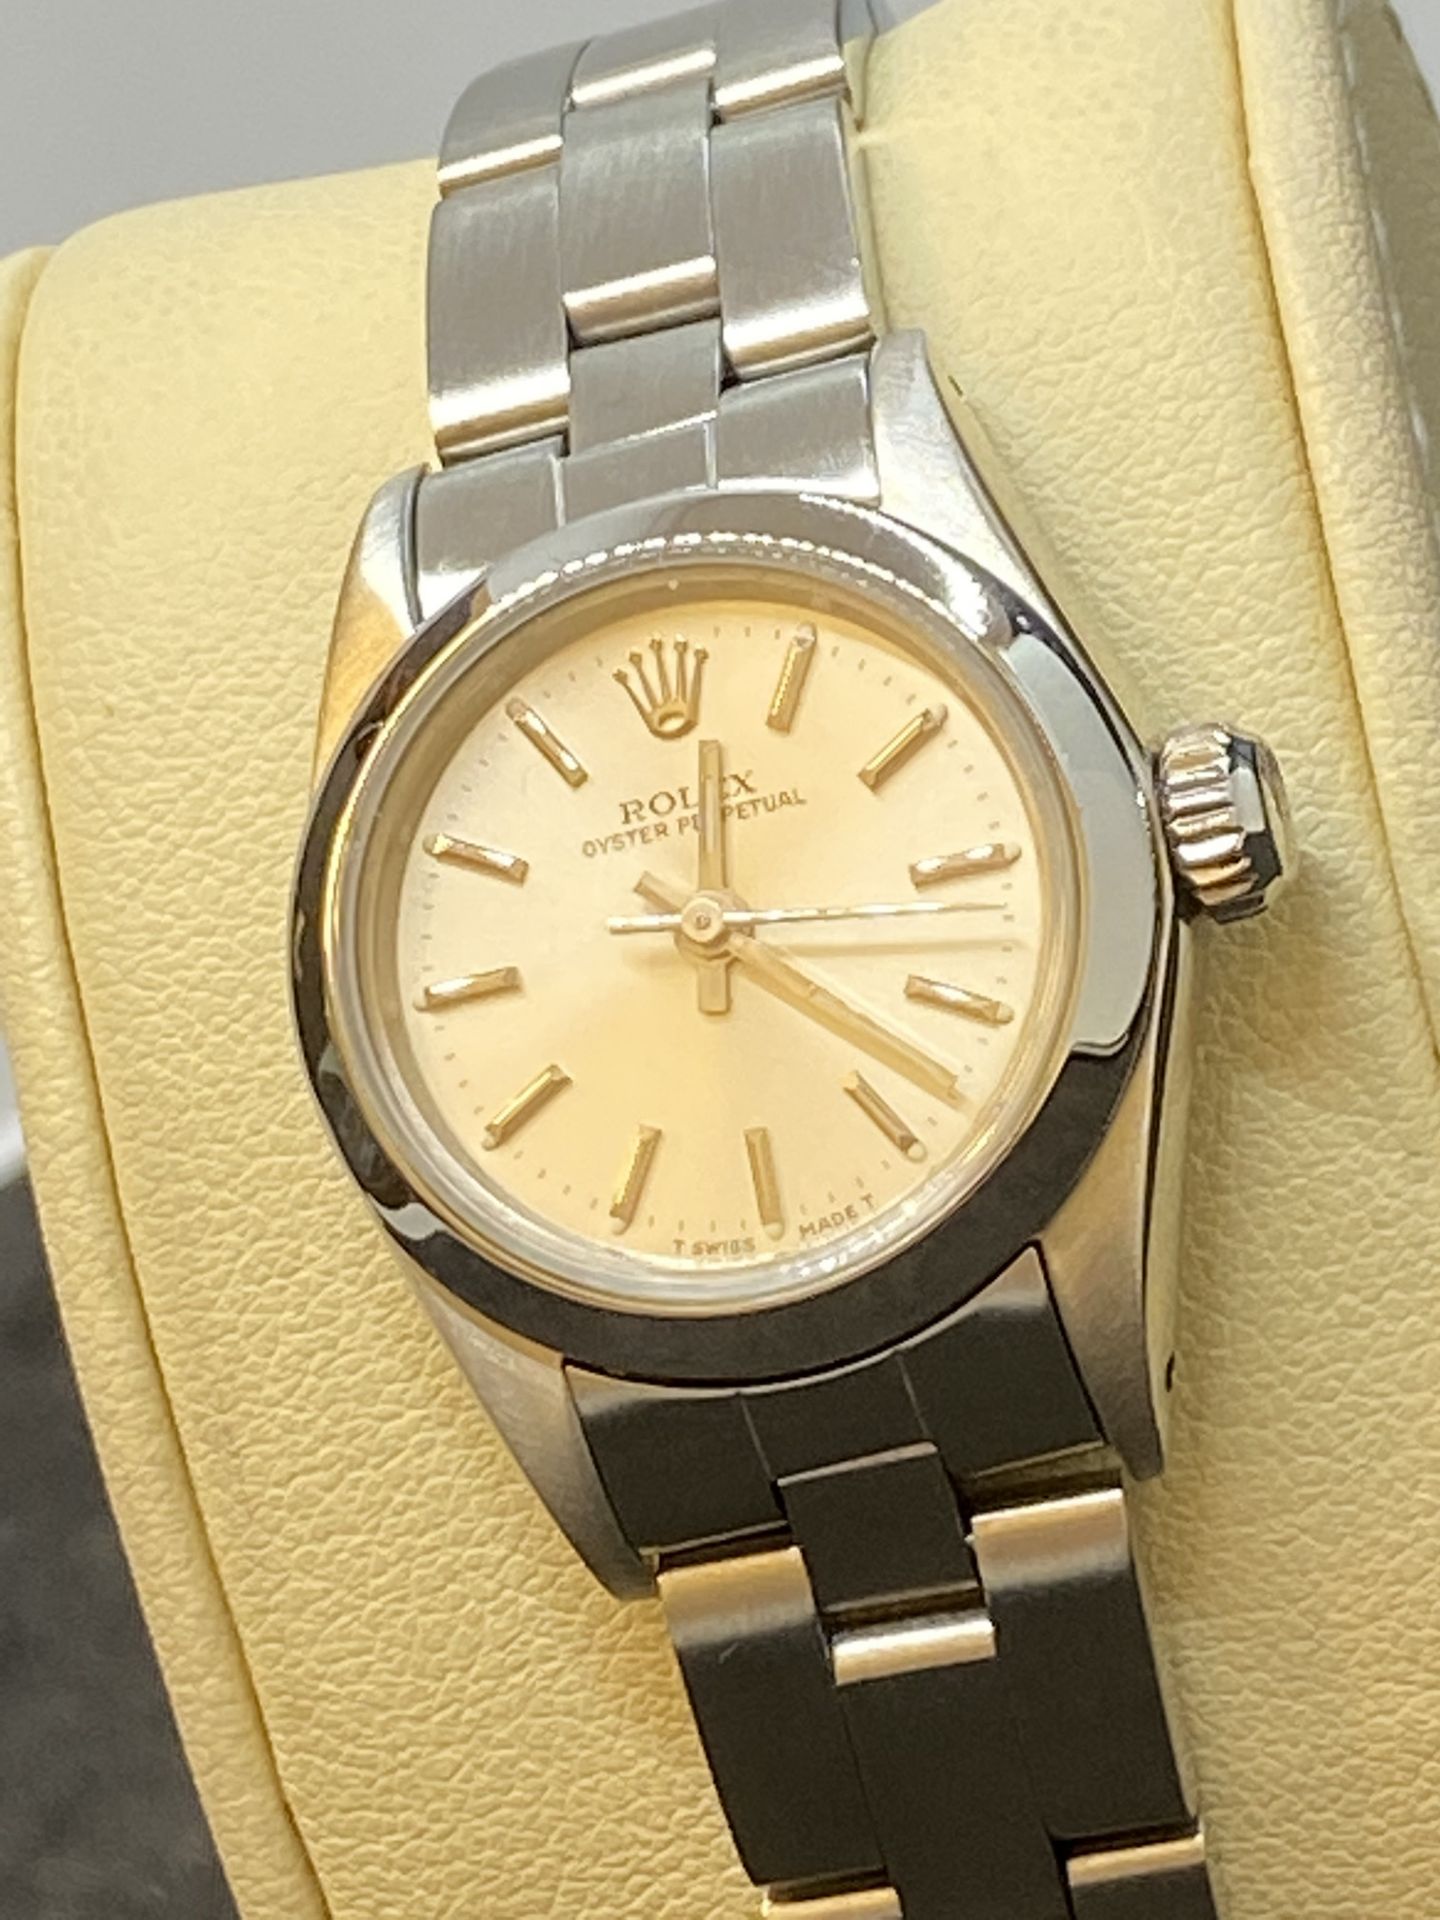 LADIES STAINLESS STEEL ROLEX OYSTER PERPETUAL WATCH - Image 3 of 7